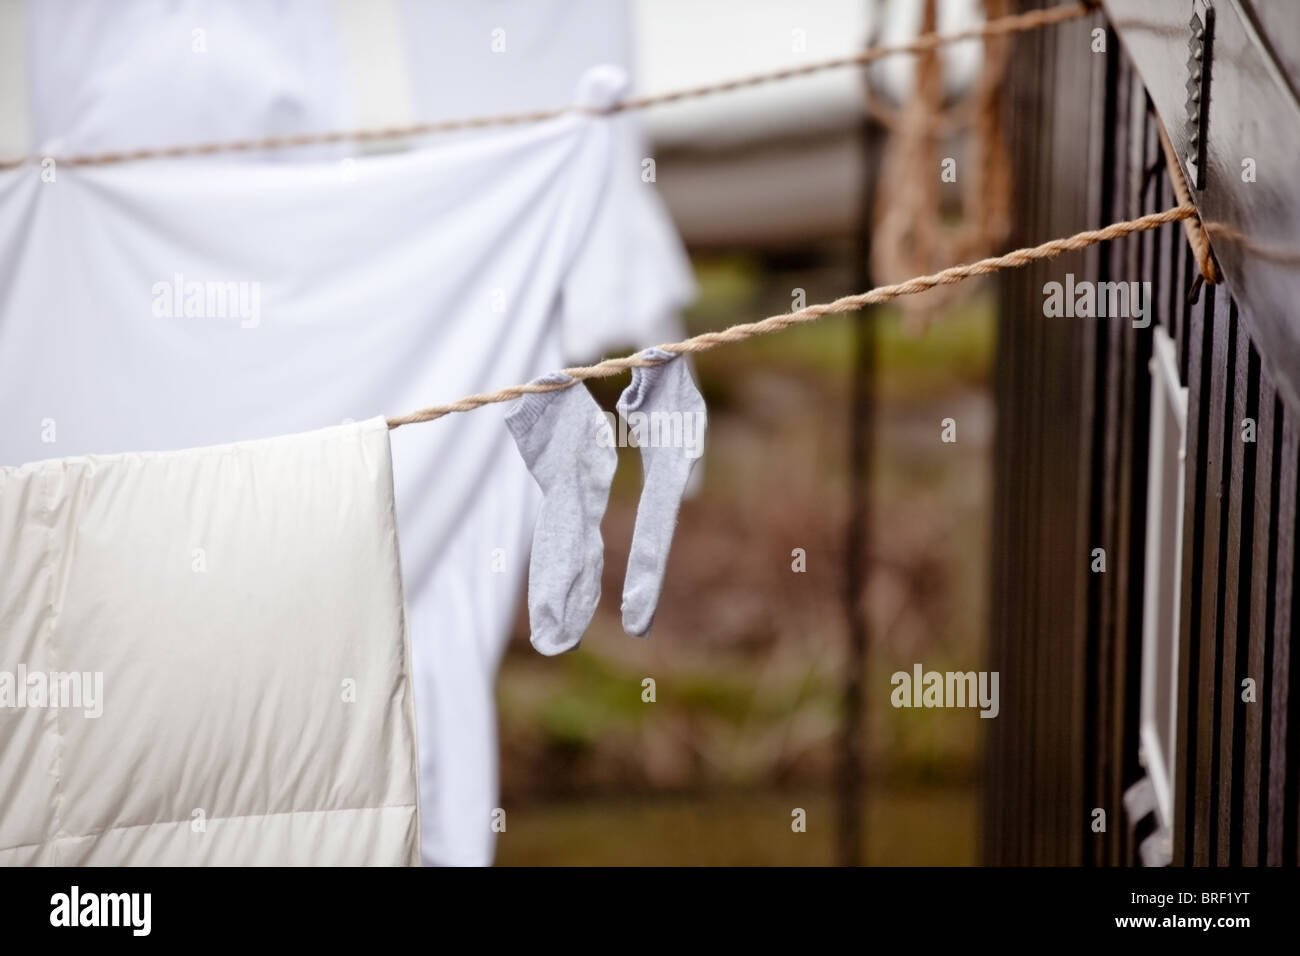 two small child's socks and linen hanging for drying. horizontal shot Stock Photo